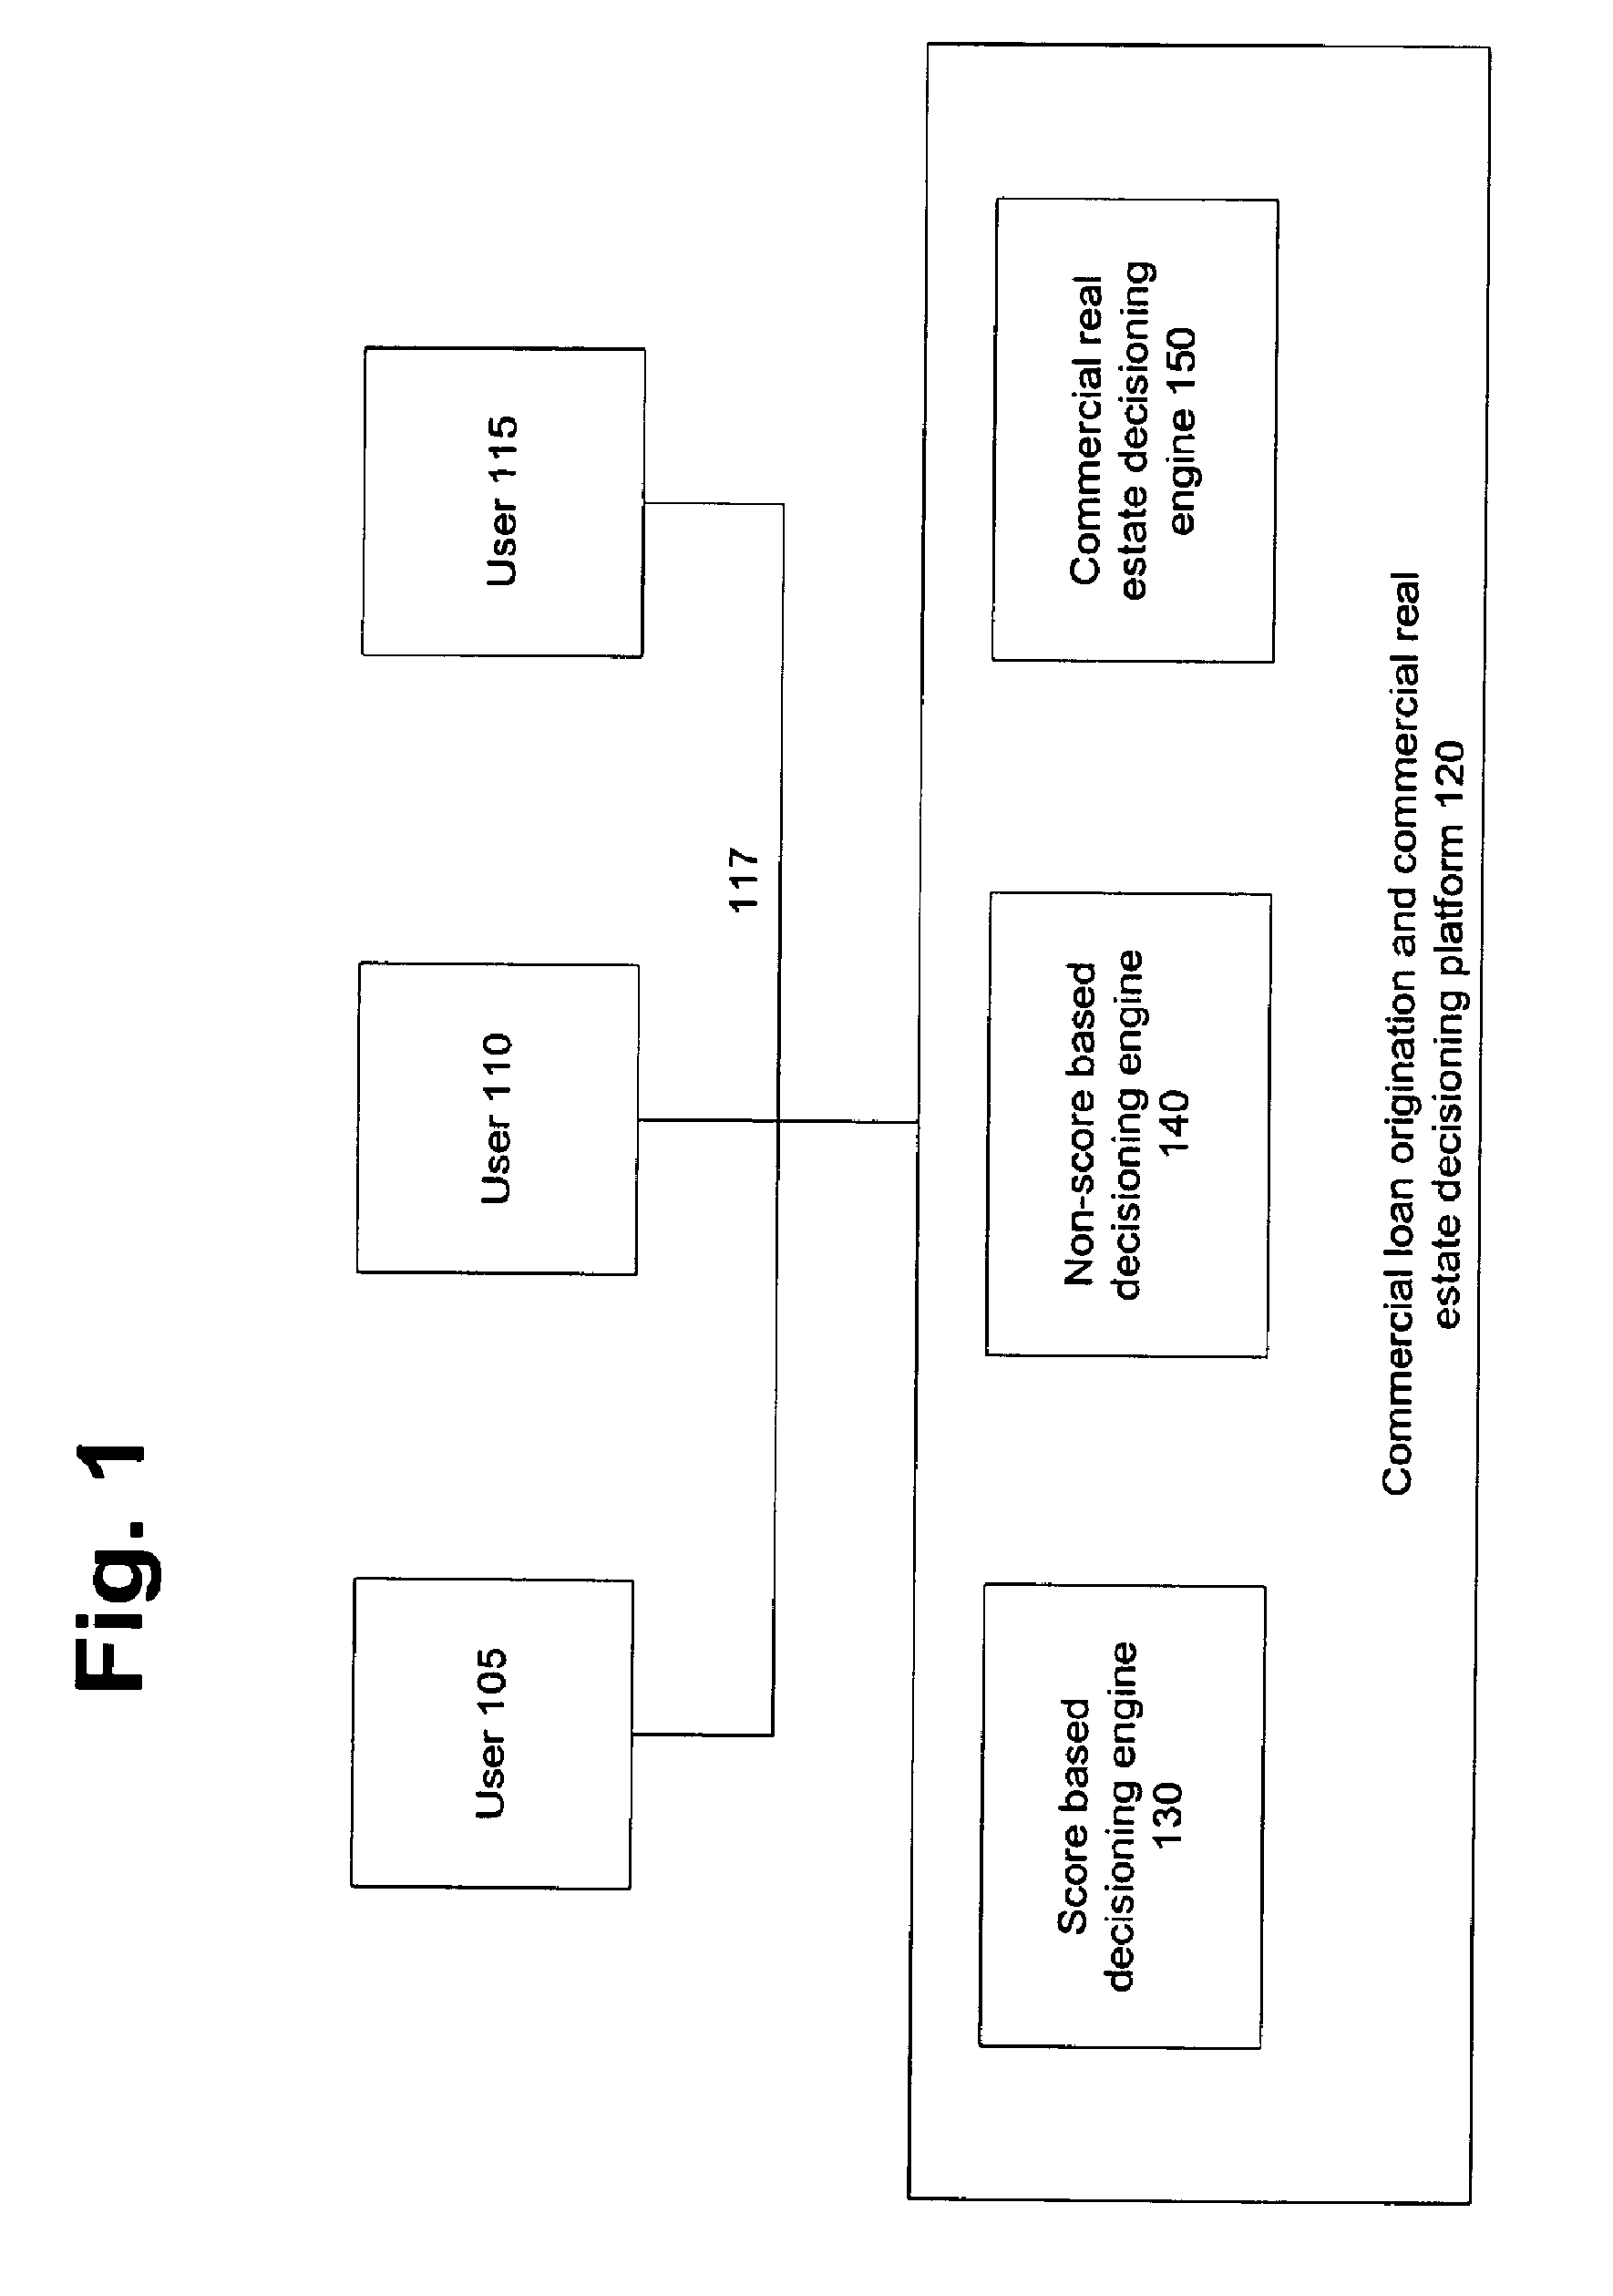 System and method for consolidation of commercial and professional underwriting